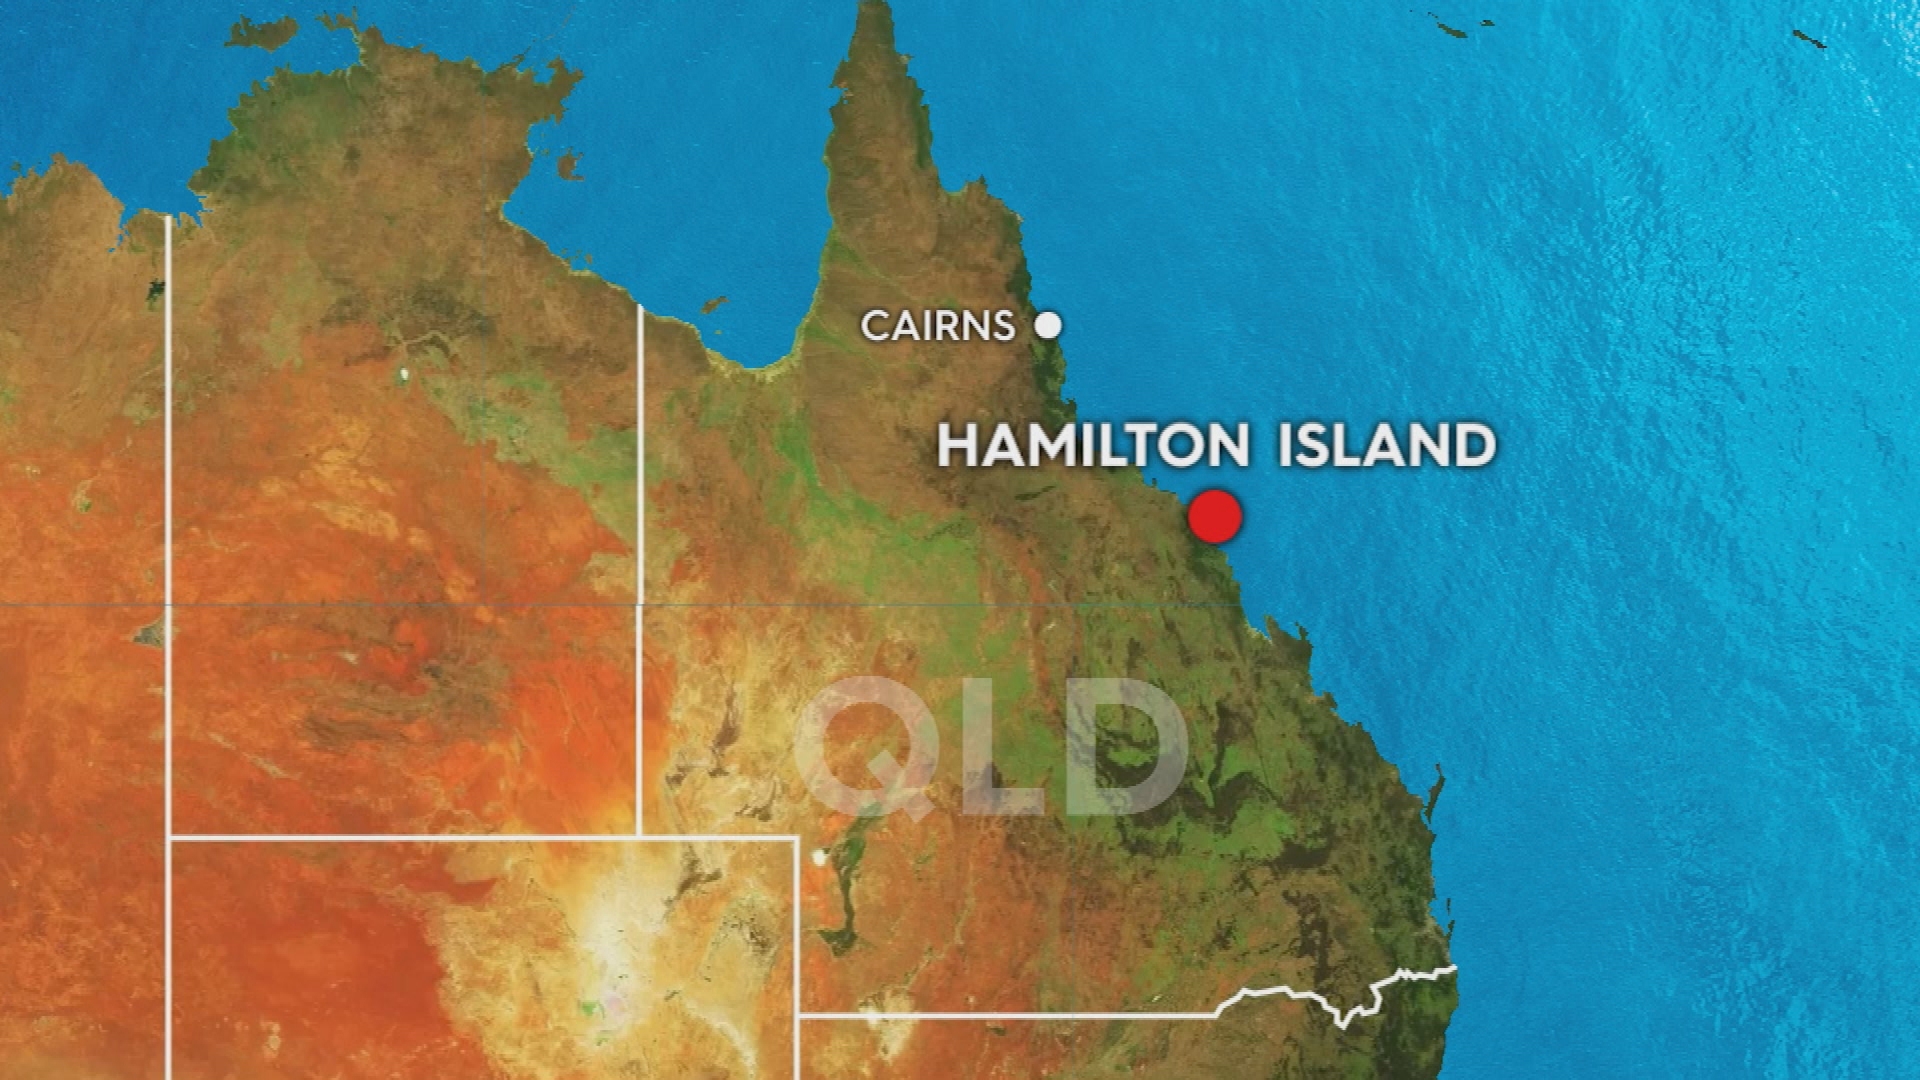 Four feared dead in military helicopter crash during Exercise Talisman Sabre off Hamilton Island.